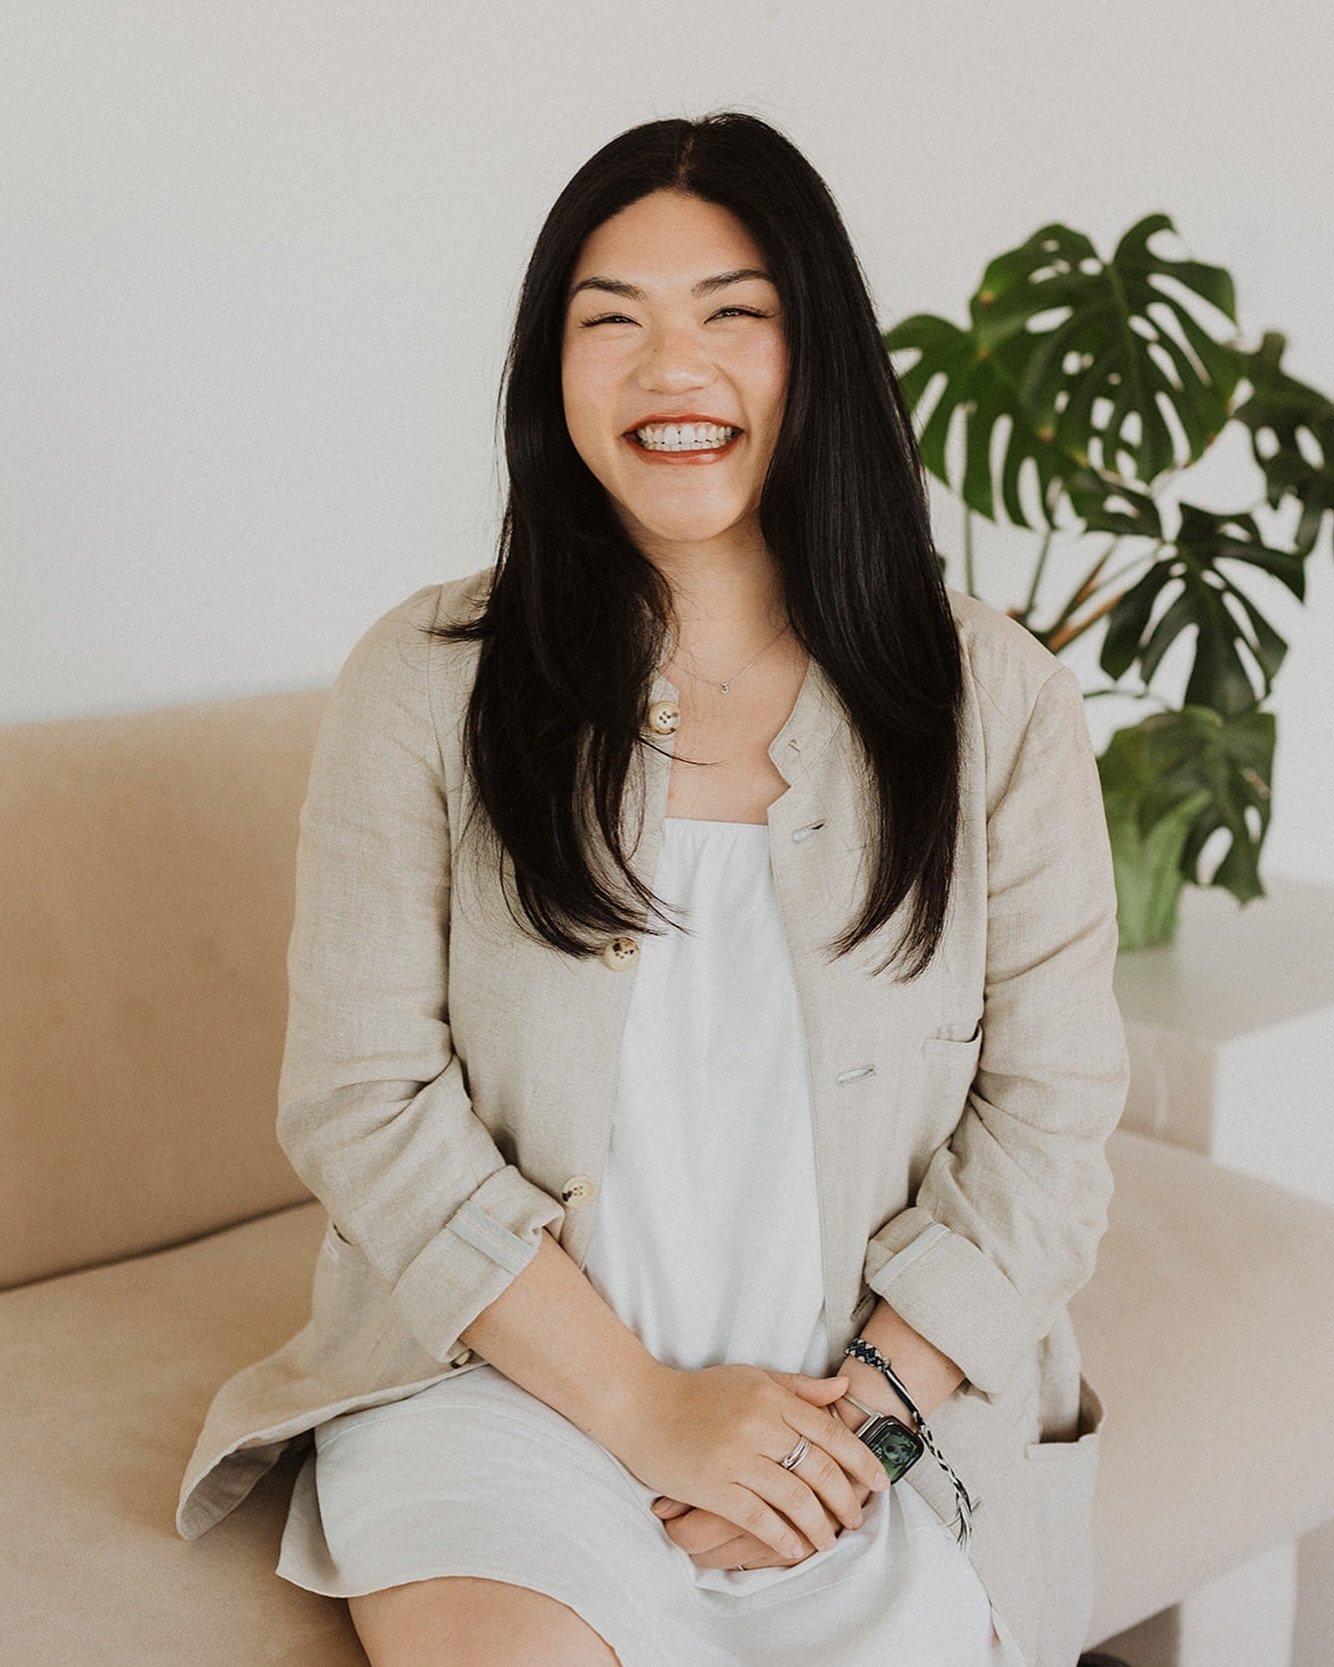 Jolene, Jolene, Jolene, JOLENE! 🎶 Jolene is a Bay Area native and currently resides in the beautiful City of San Francisco. She discovered her love of events from having a large extended family and all the events that came with that. Her professiona